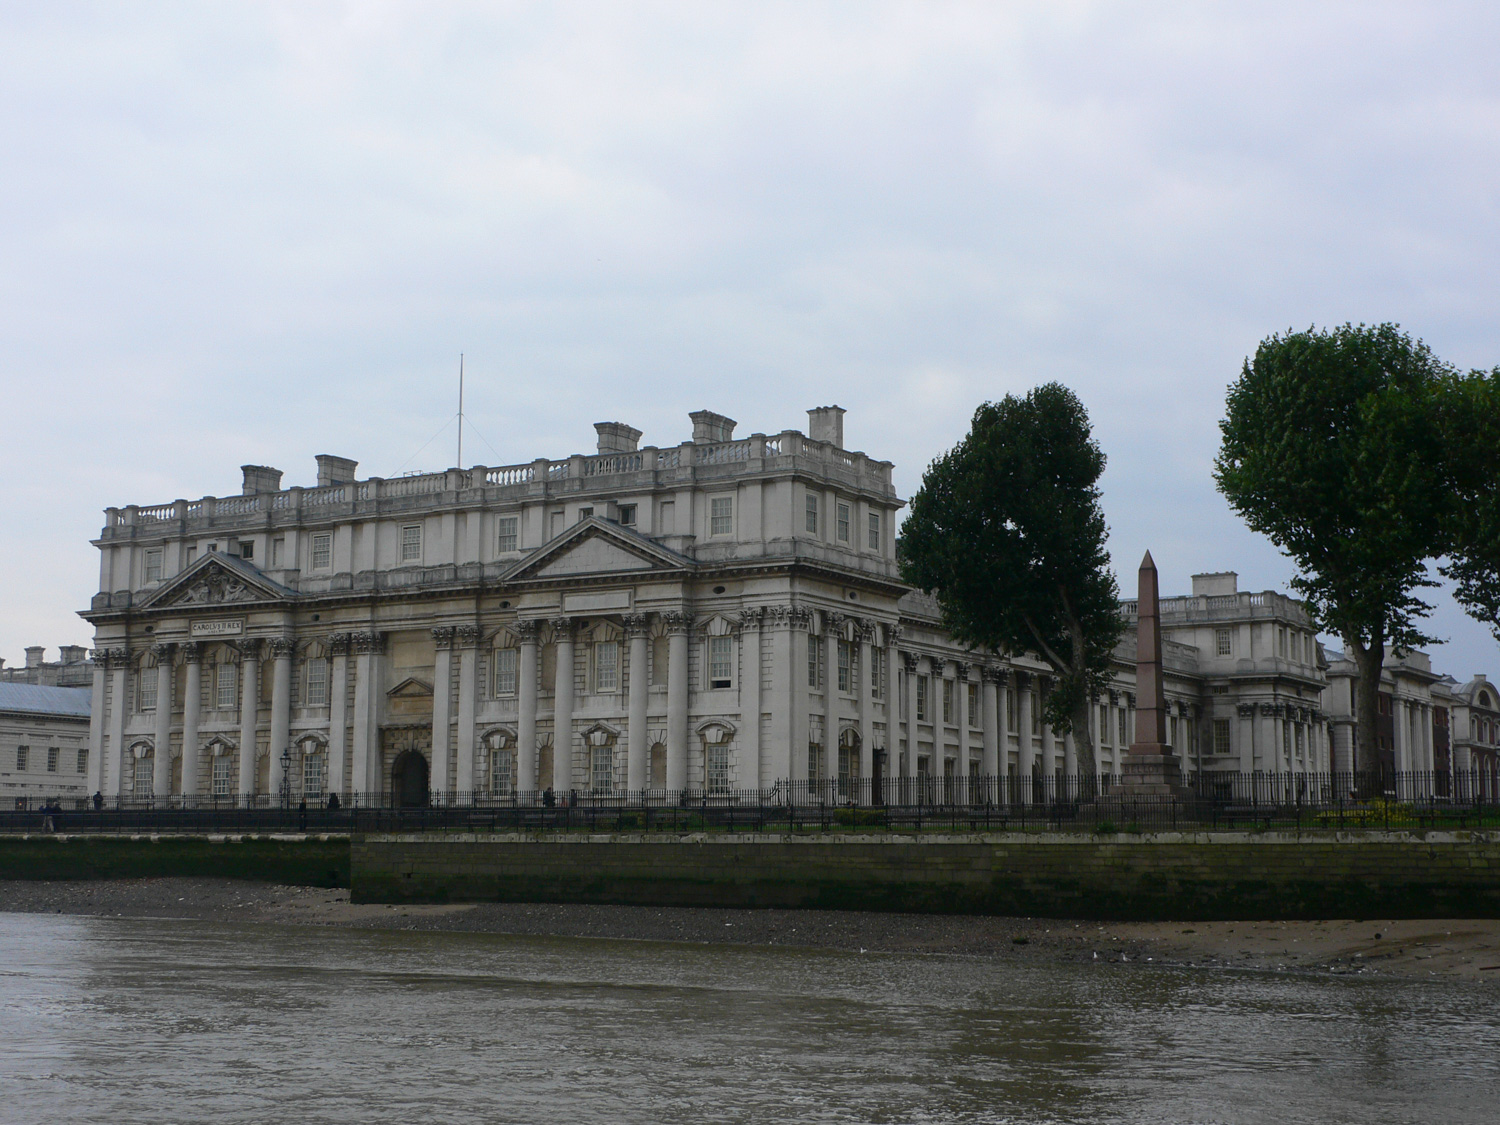 The Royal Naval College at Greenwich